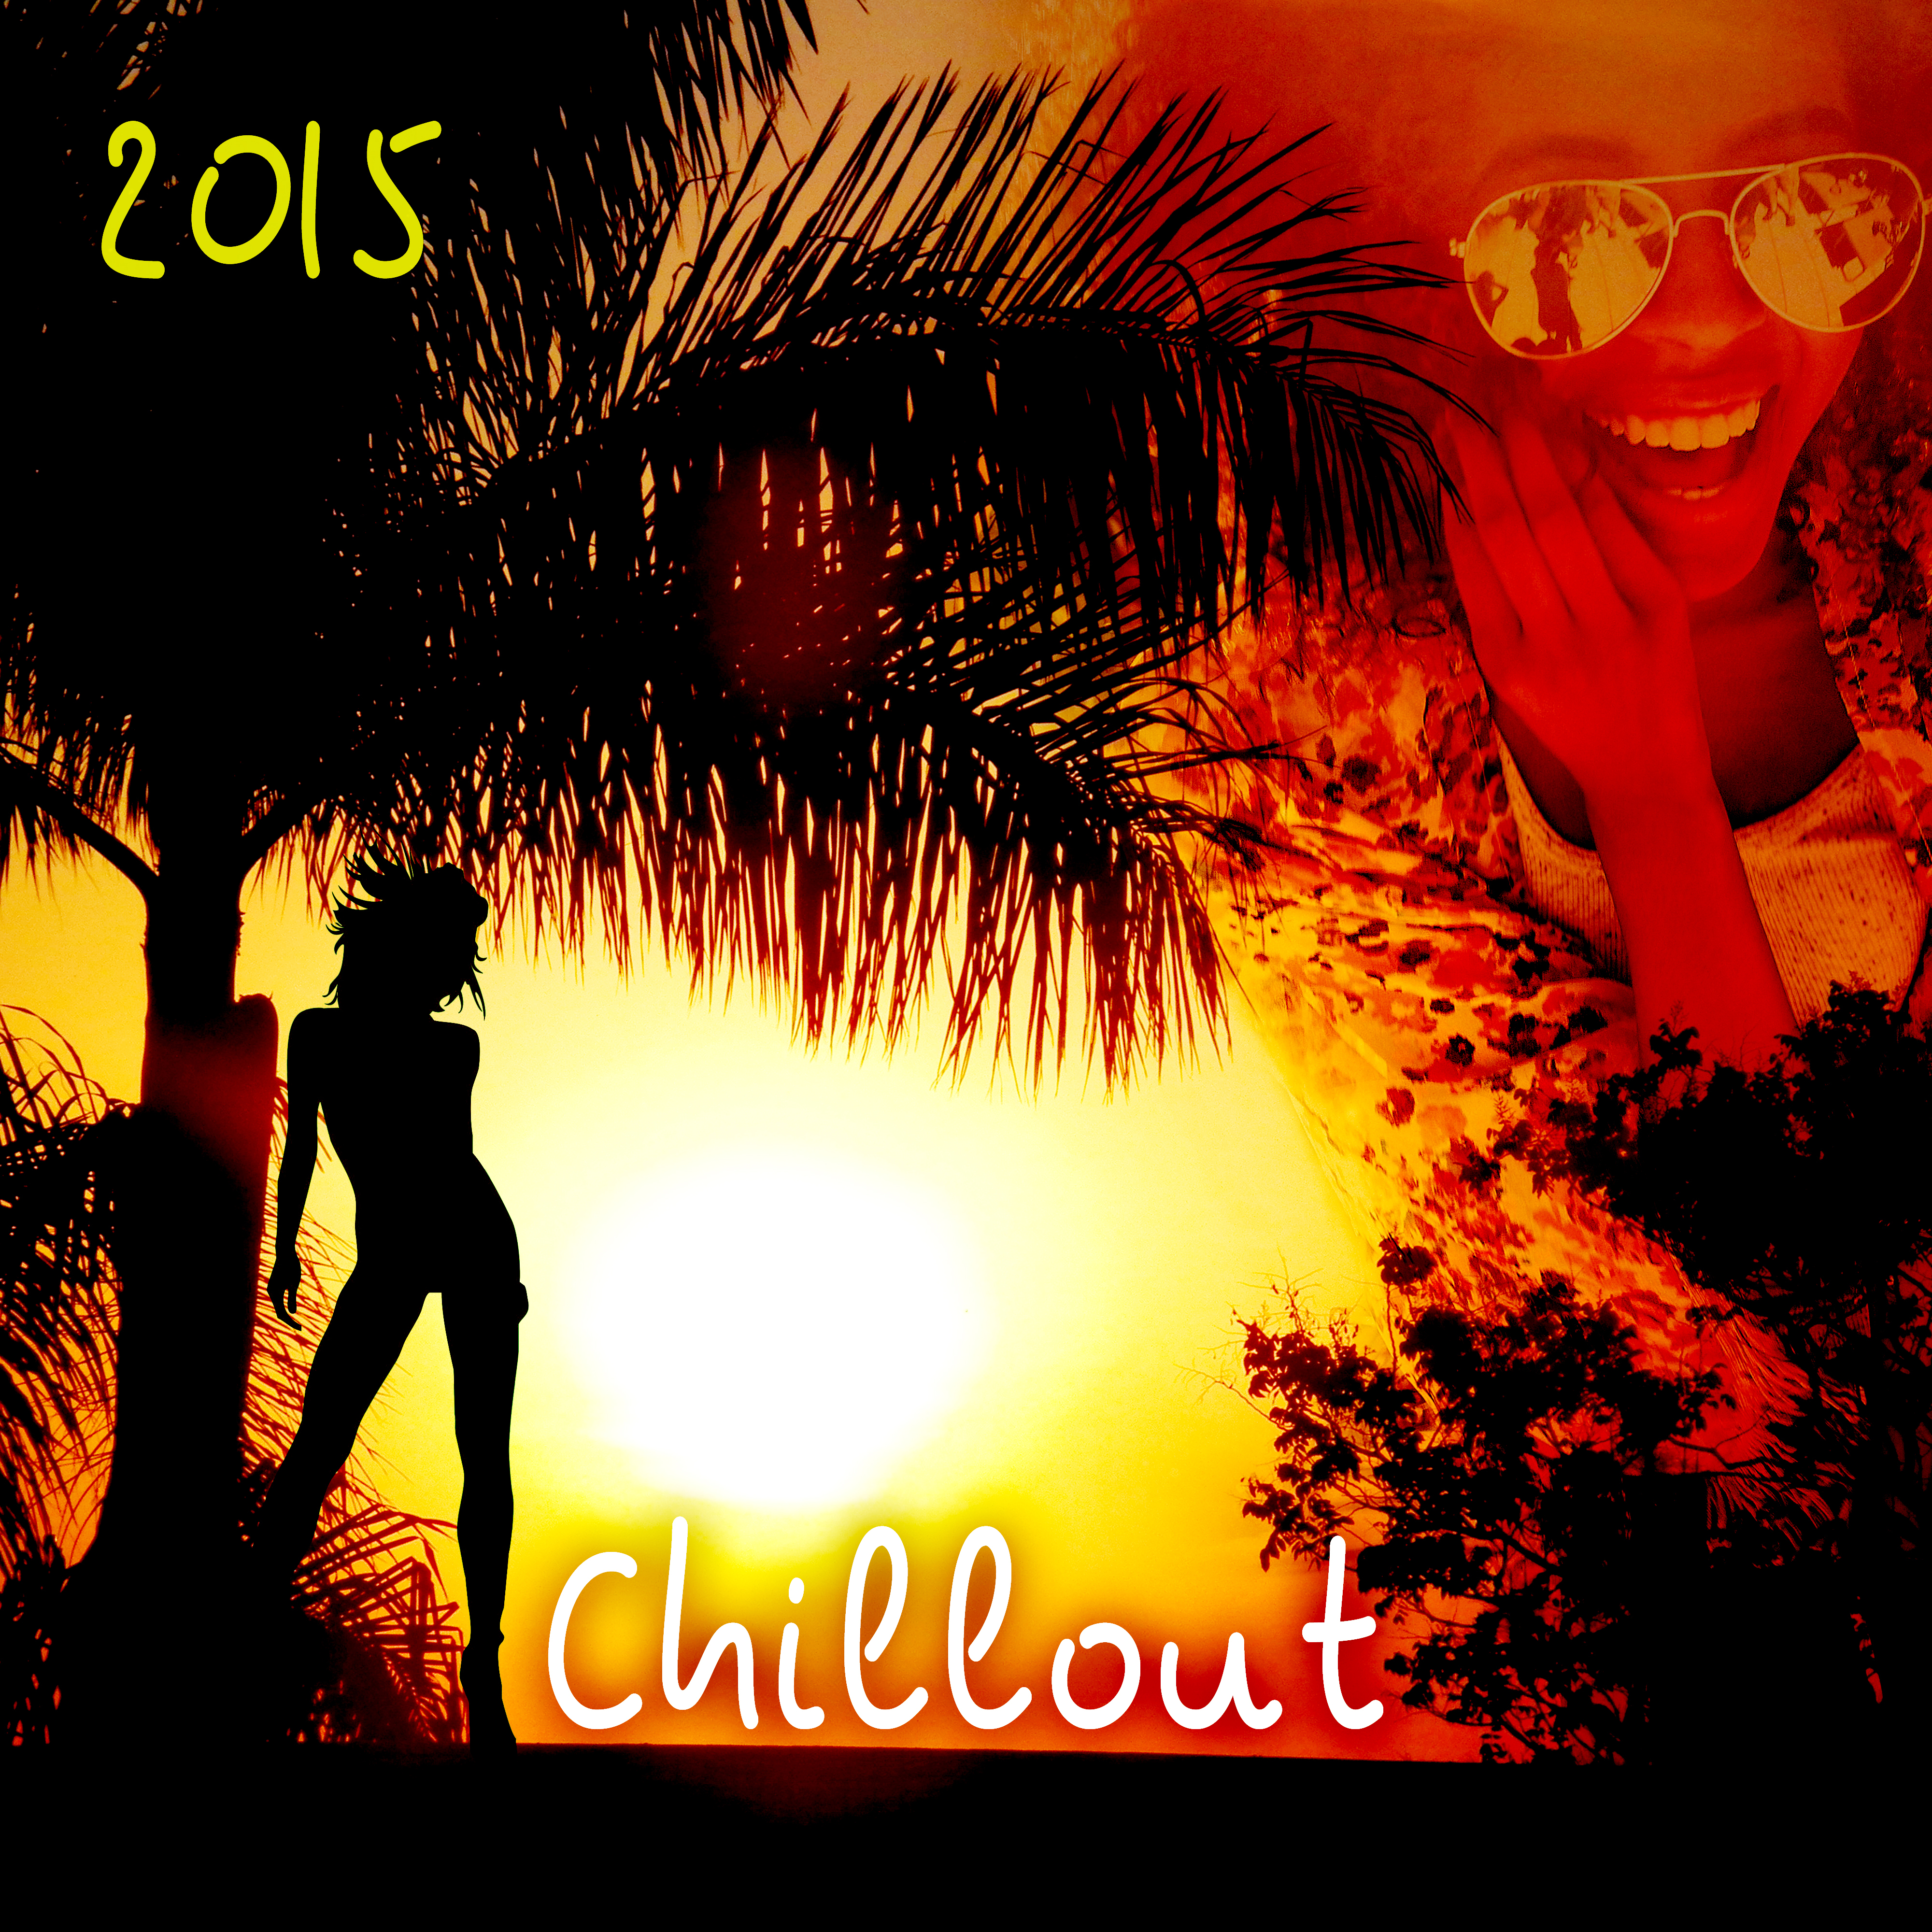 Chillout 2015 - Summertime Beach Party Electronic Music, Café Lounge to del Mar Ibiza the Classic Sunset Chill Out Session